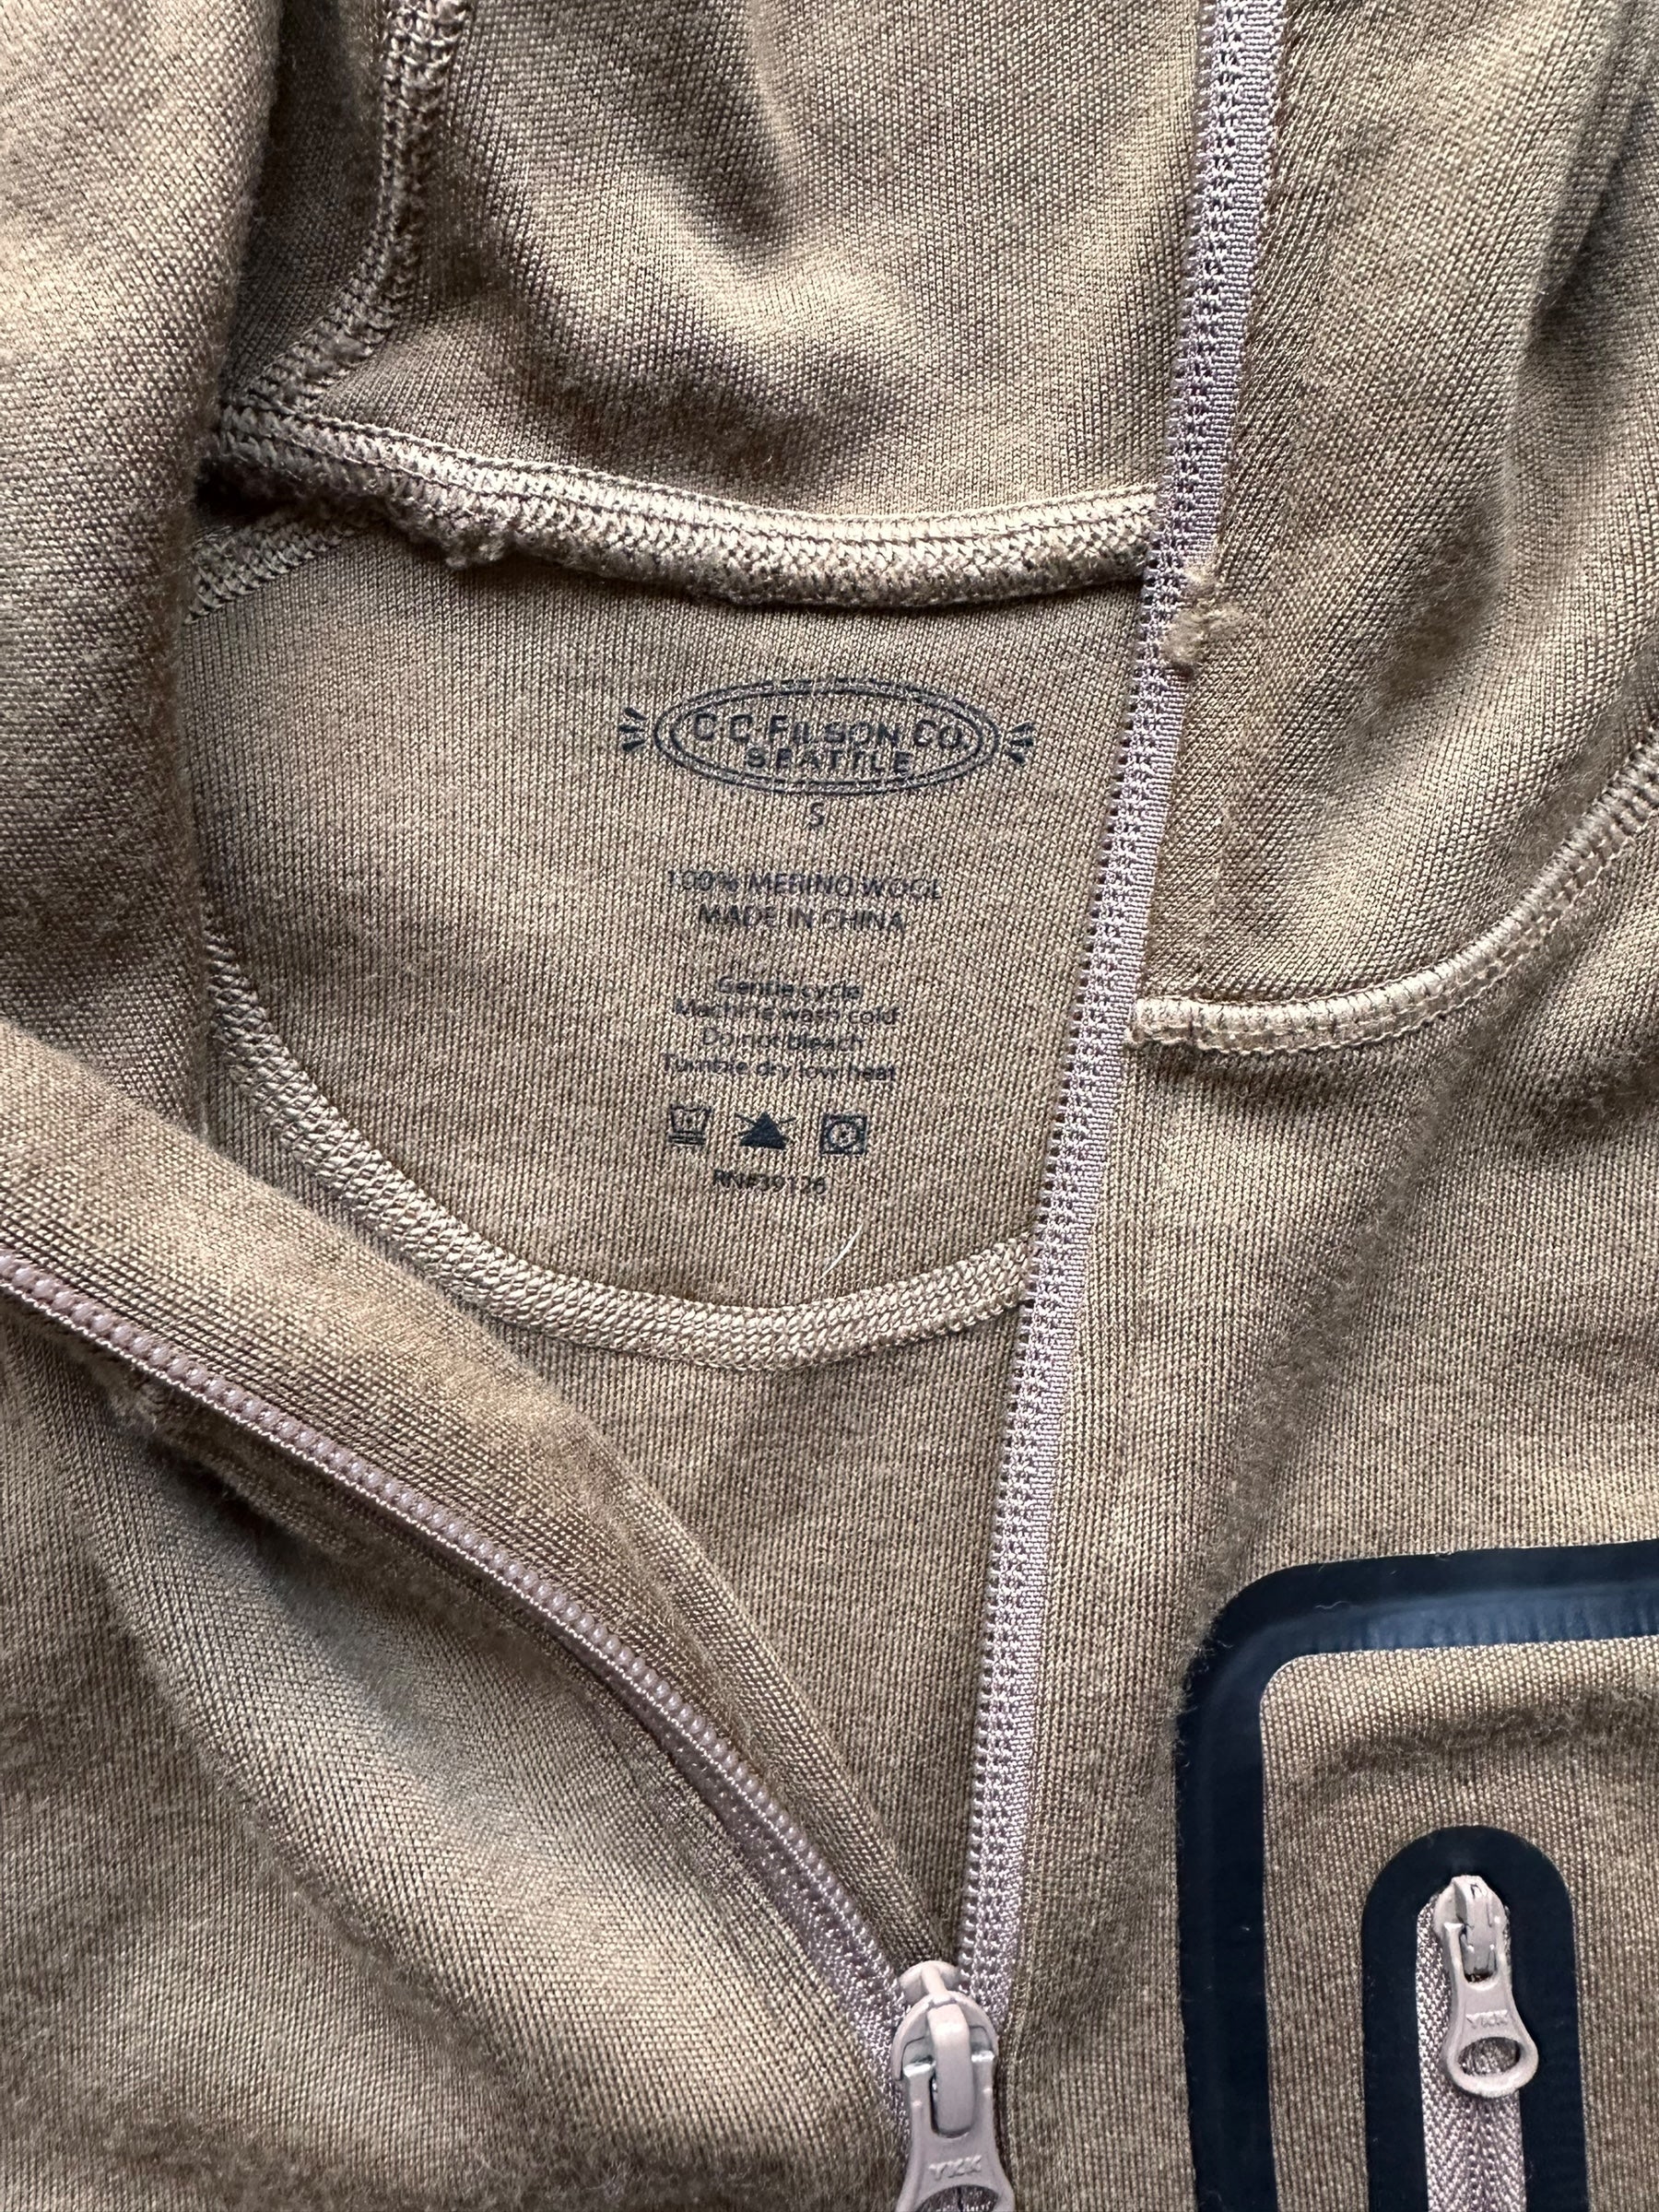 Production/Sizing Tag on Filson 400G Merino Wool Zip Up Hoodie SZ M |  Barn Owl Vintage Goods | Filson Bargain Outlet Seattle